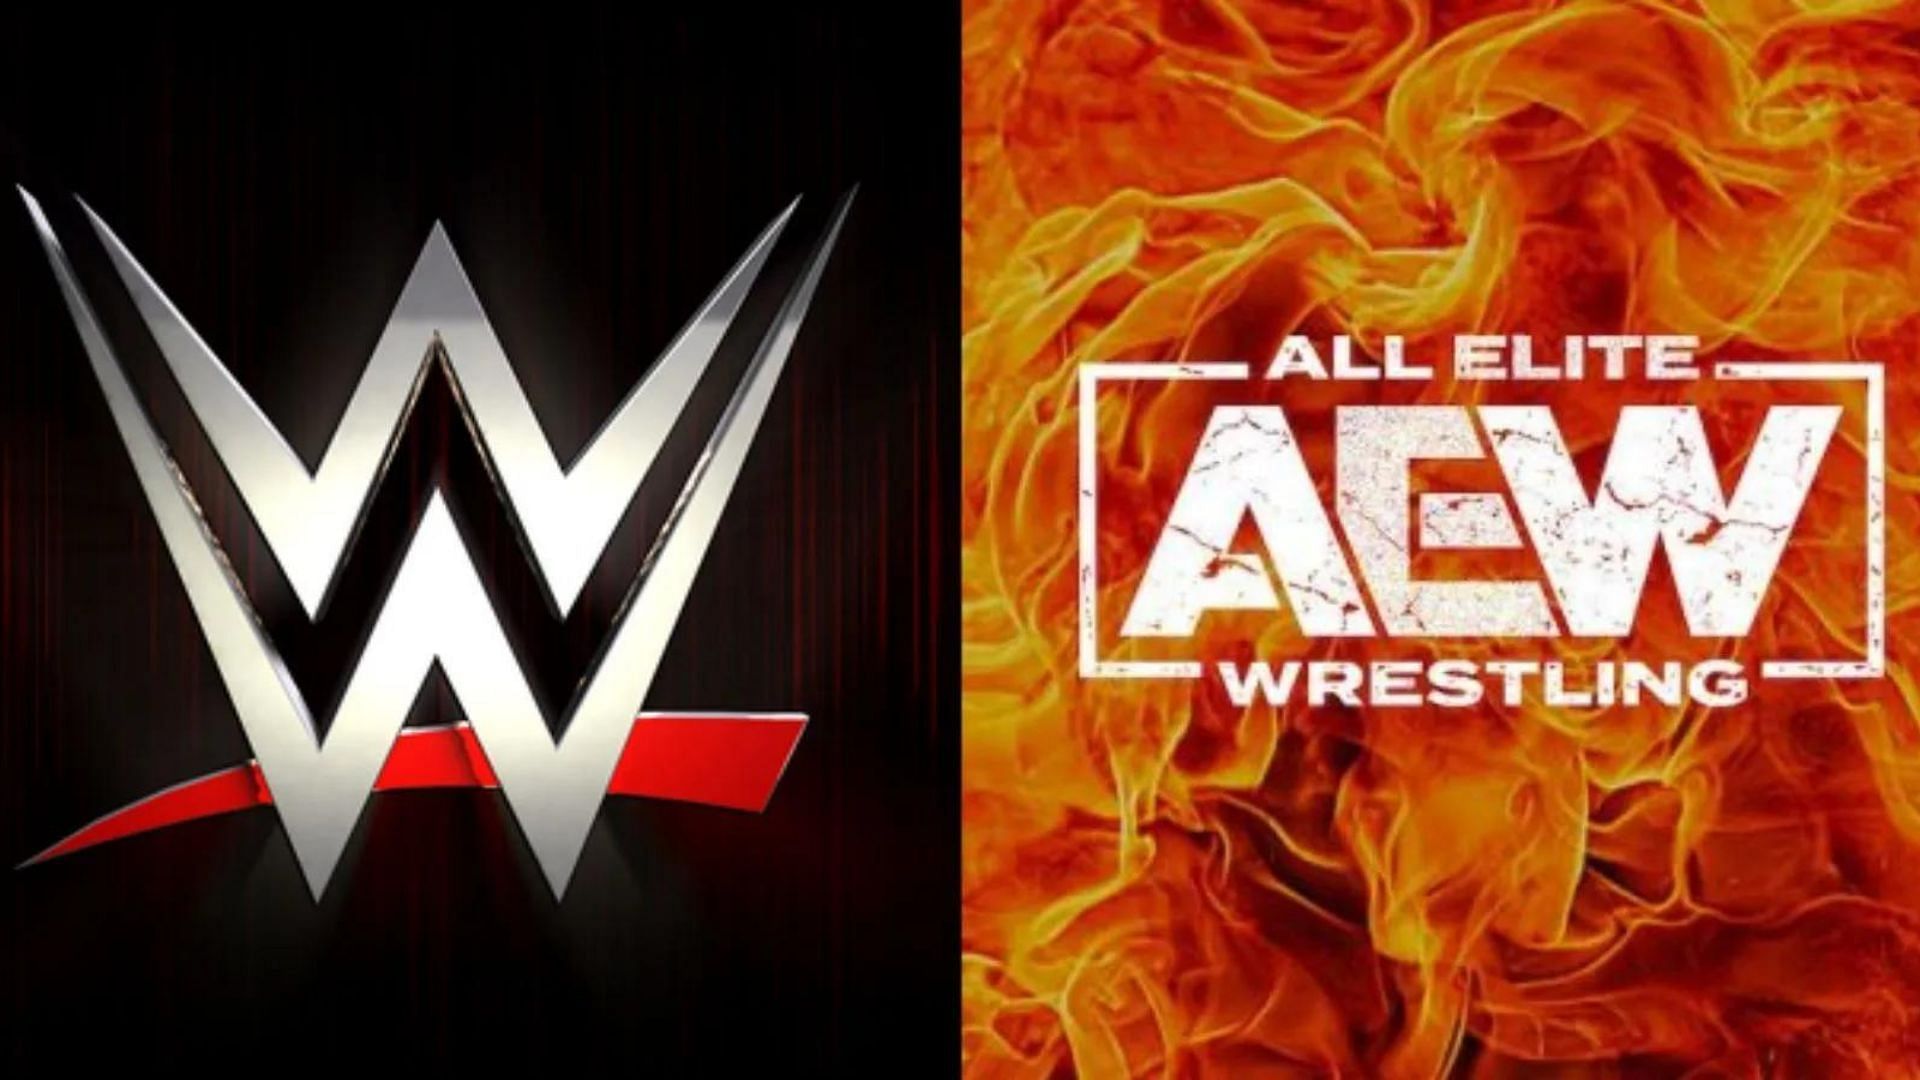 WWE and AEW are one of the biggest Wrestling promotions